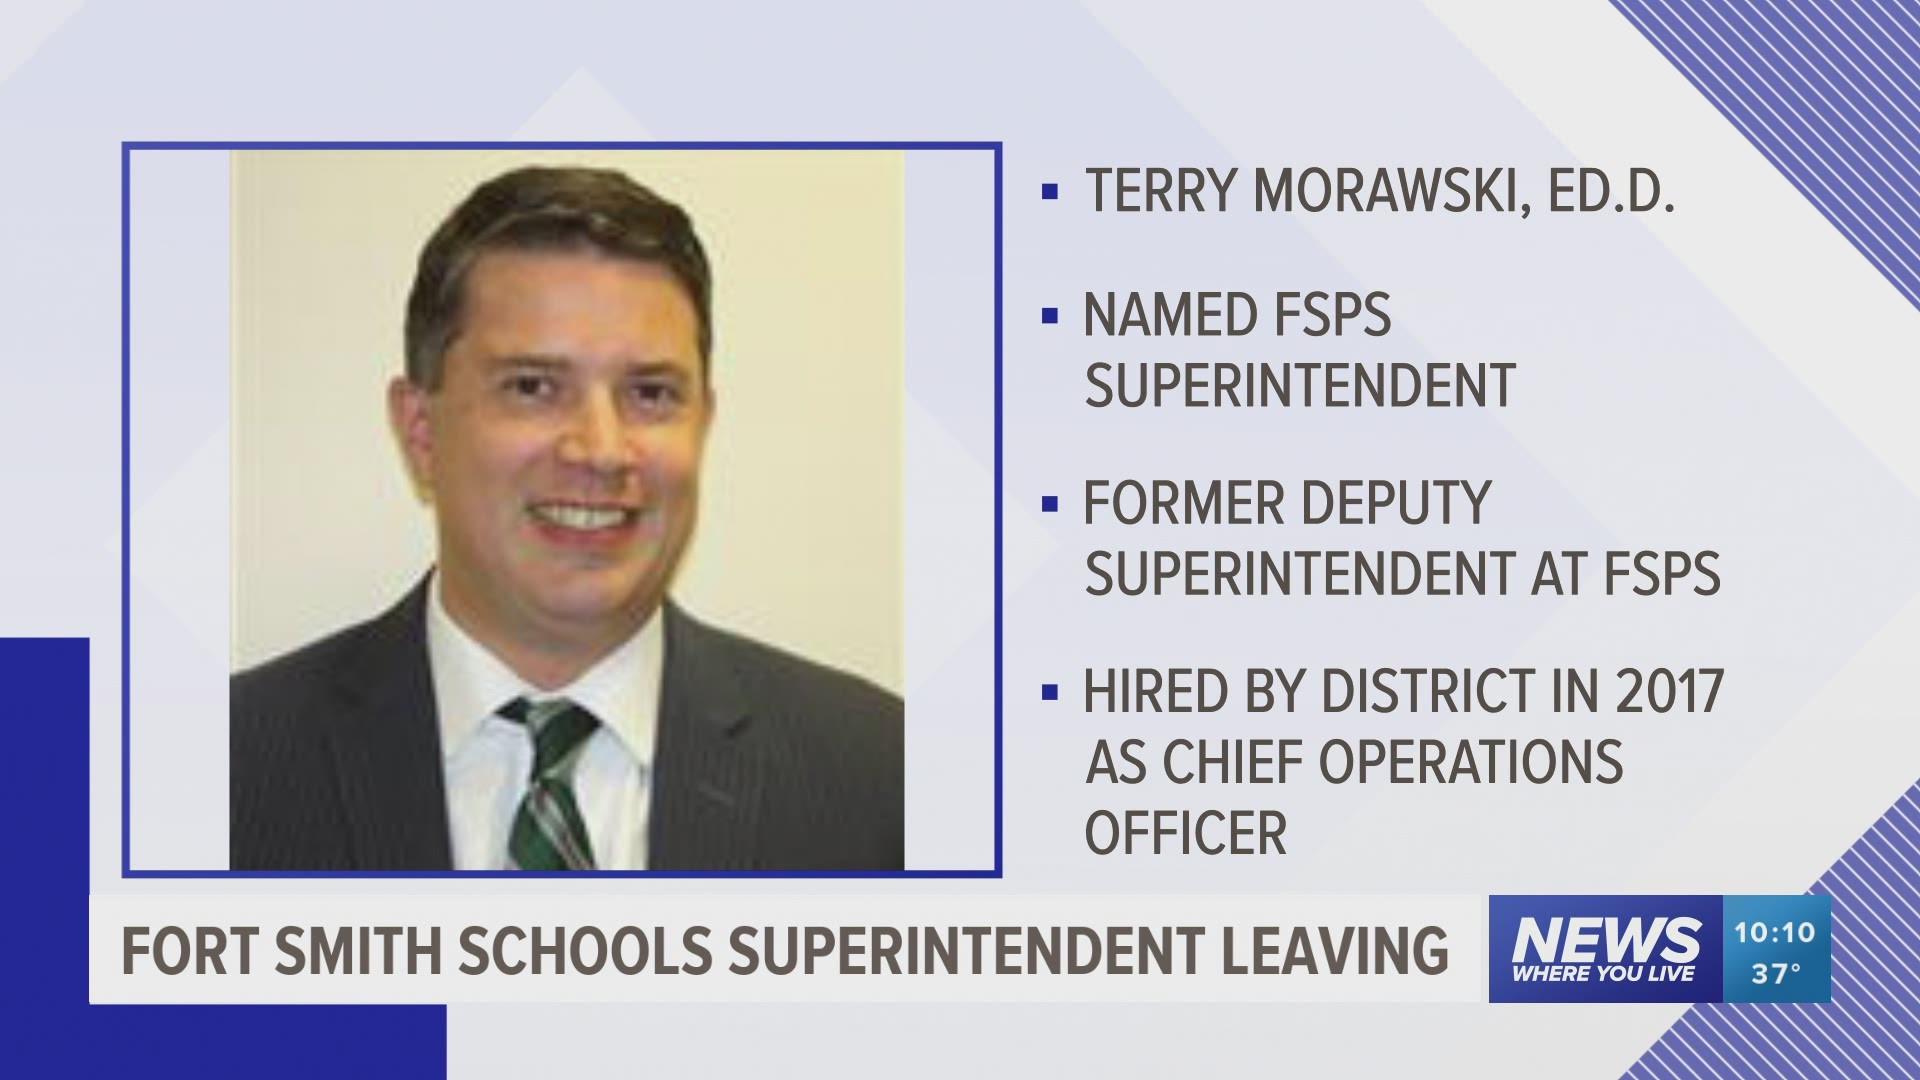 Tuesday evening the Board of Education for Fort Smith Public Schools announced Deputy Superintendent Terry Morawski to replace Brubaker.